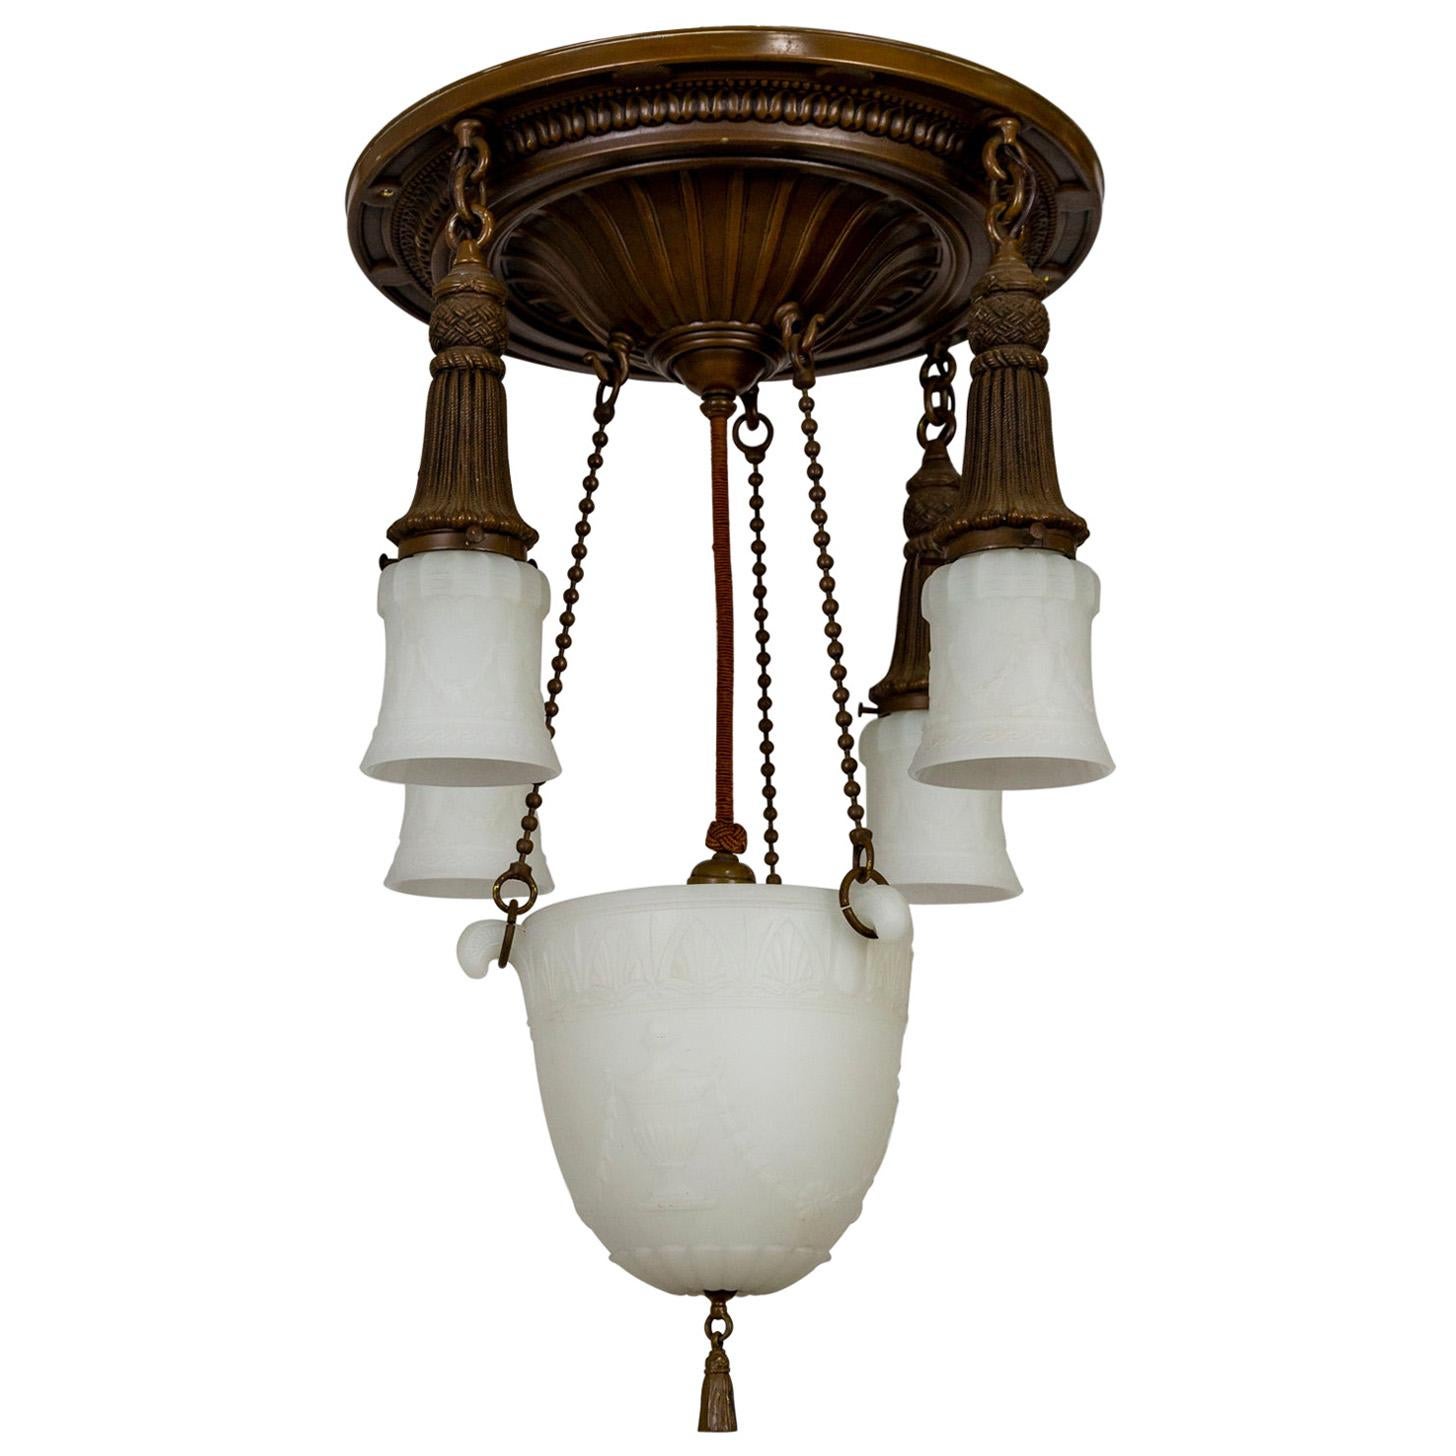 An early 20th century, shower style chandelier with lacquered brass and milk glass. Details include beaded chains, shade holders in the form of tasseled ropes, and heavy, molded glass; with embossed urns, floral garlands, and Egyptian motifs; center